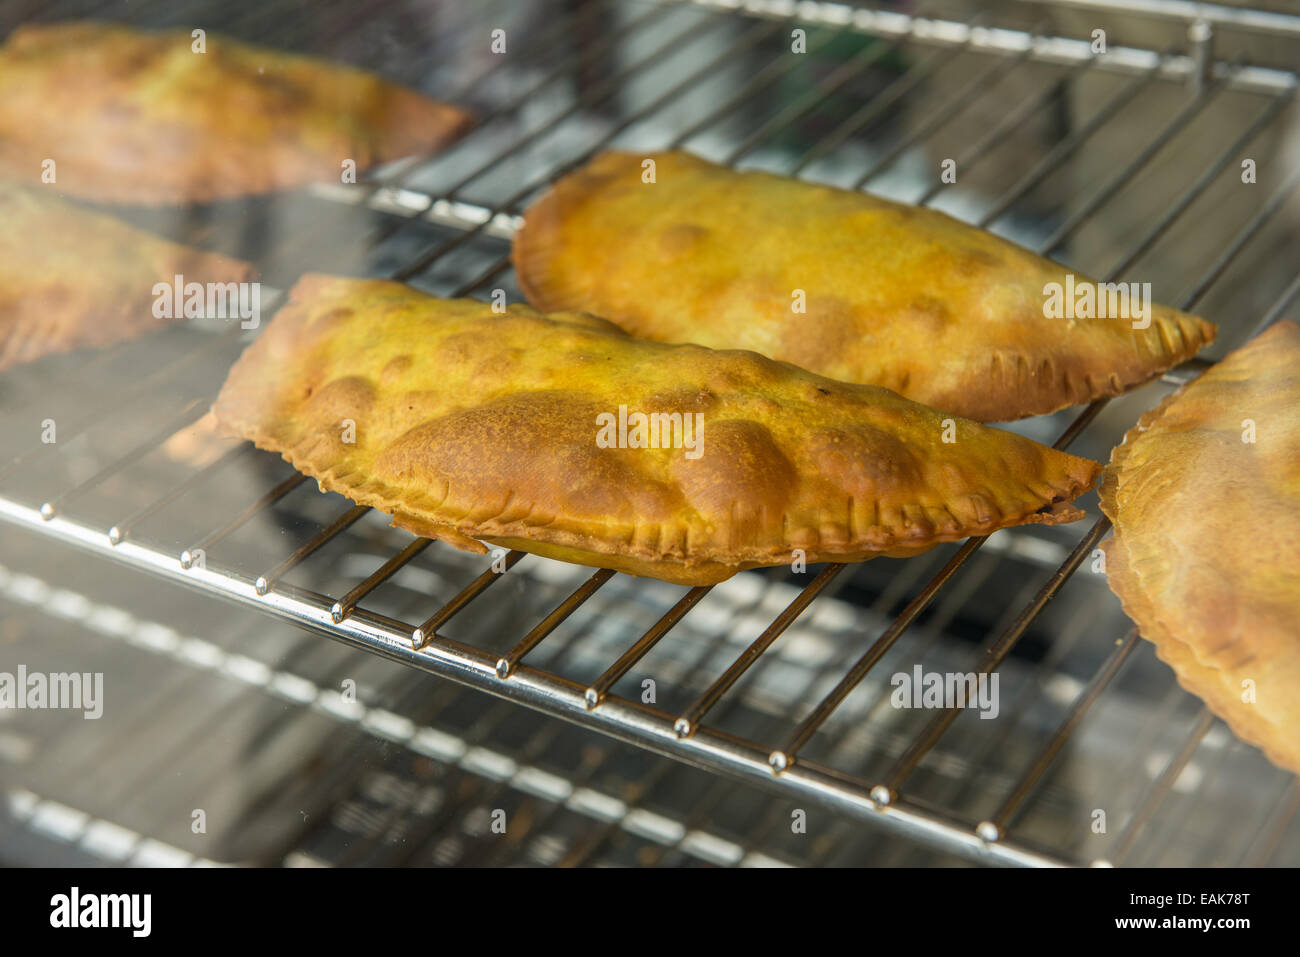 https://c8.alamy.com/comp/EAK78T/jamaican-patty-traditional-meal-pastry-with-meat-and-spieces-filling-EAK78T.jpg